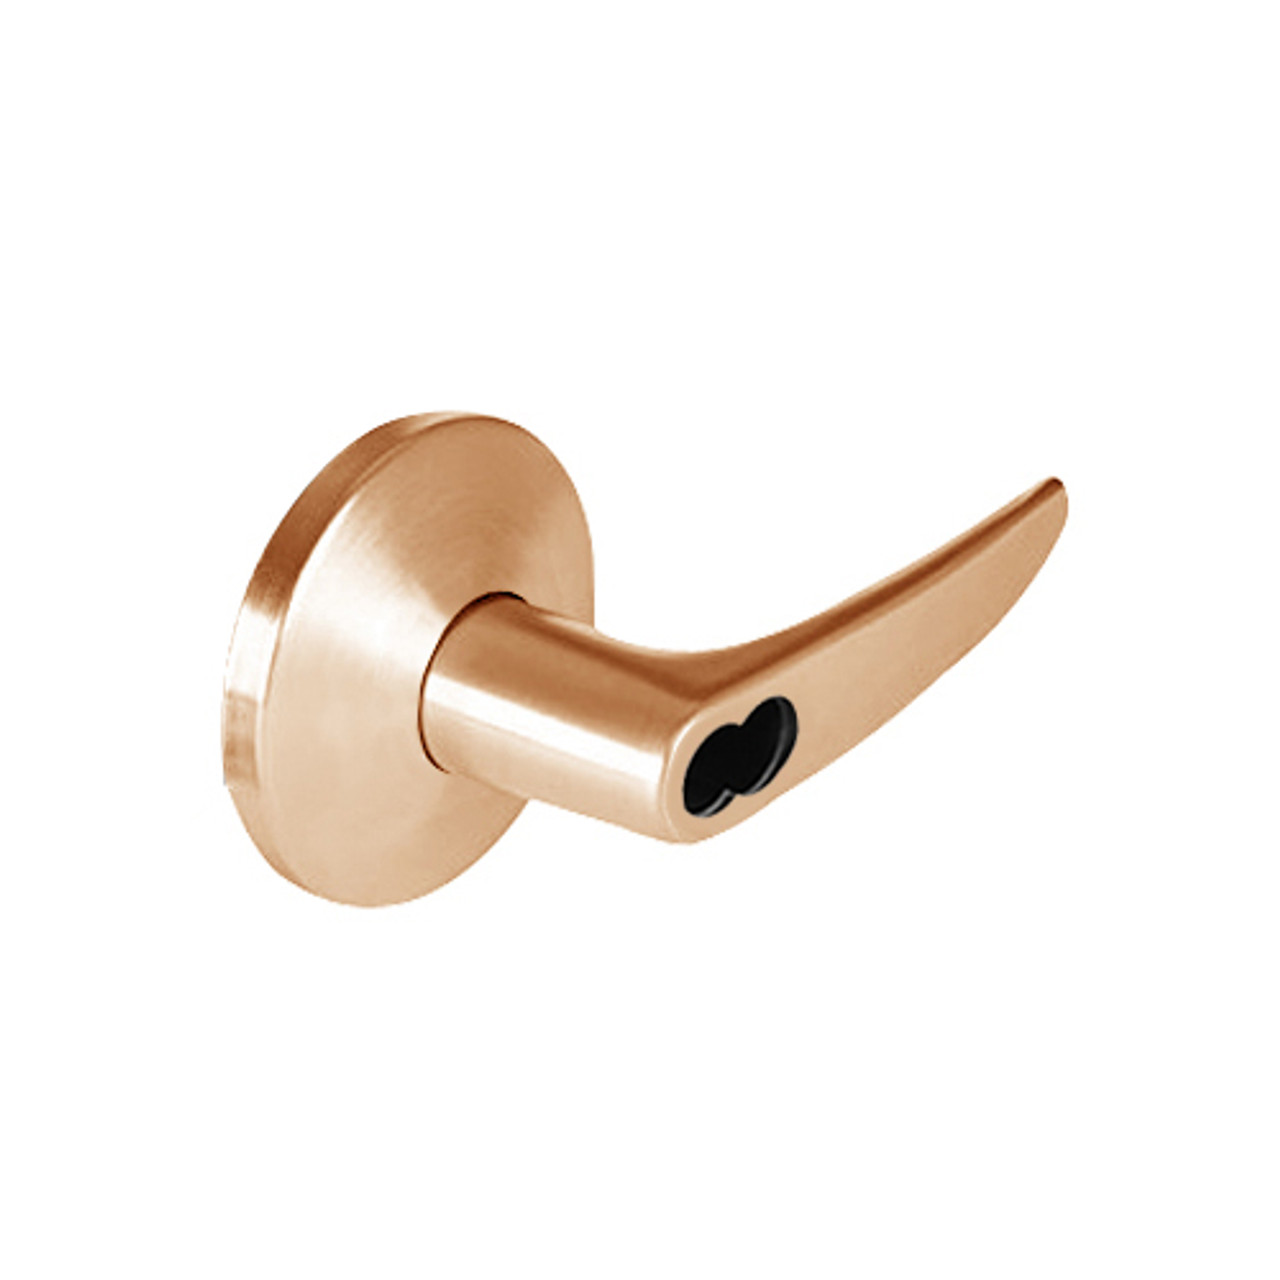 9K37XD16LSTK612 Best 9K Series Special Function Cylindrical Lever Locks with Curved without Return Lever Design Accept 7 Pin Best Core in Satin Bronze